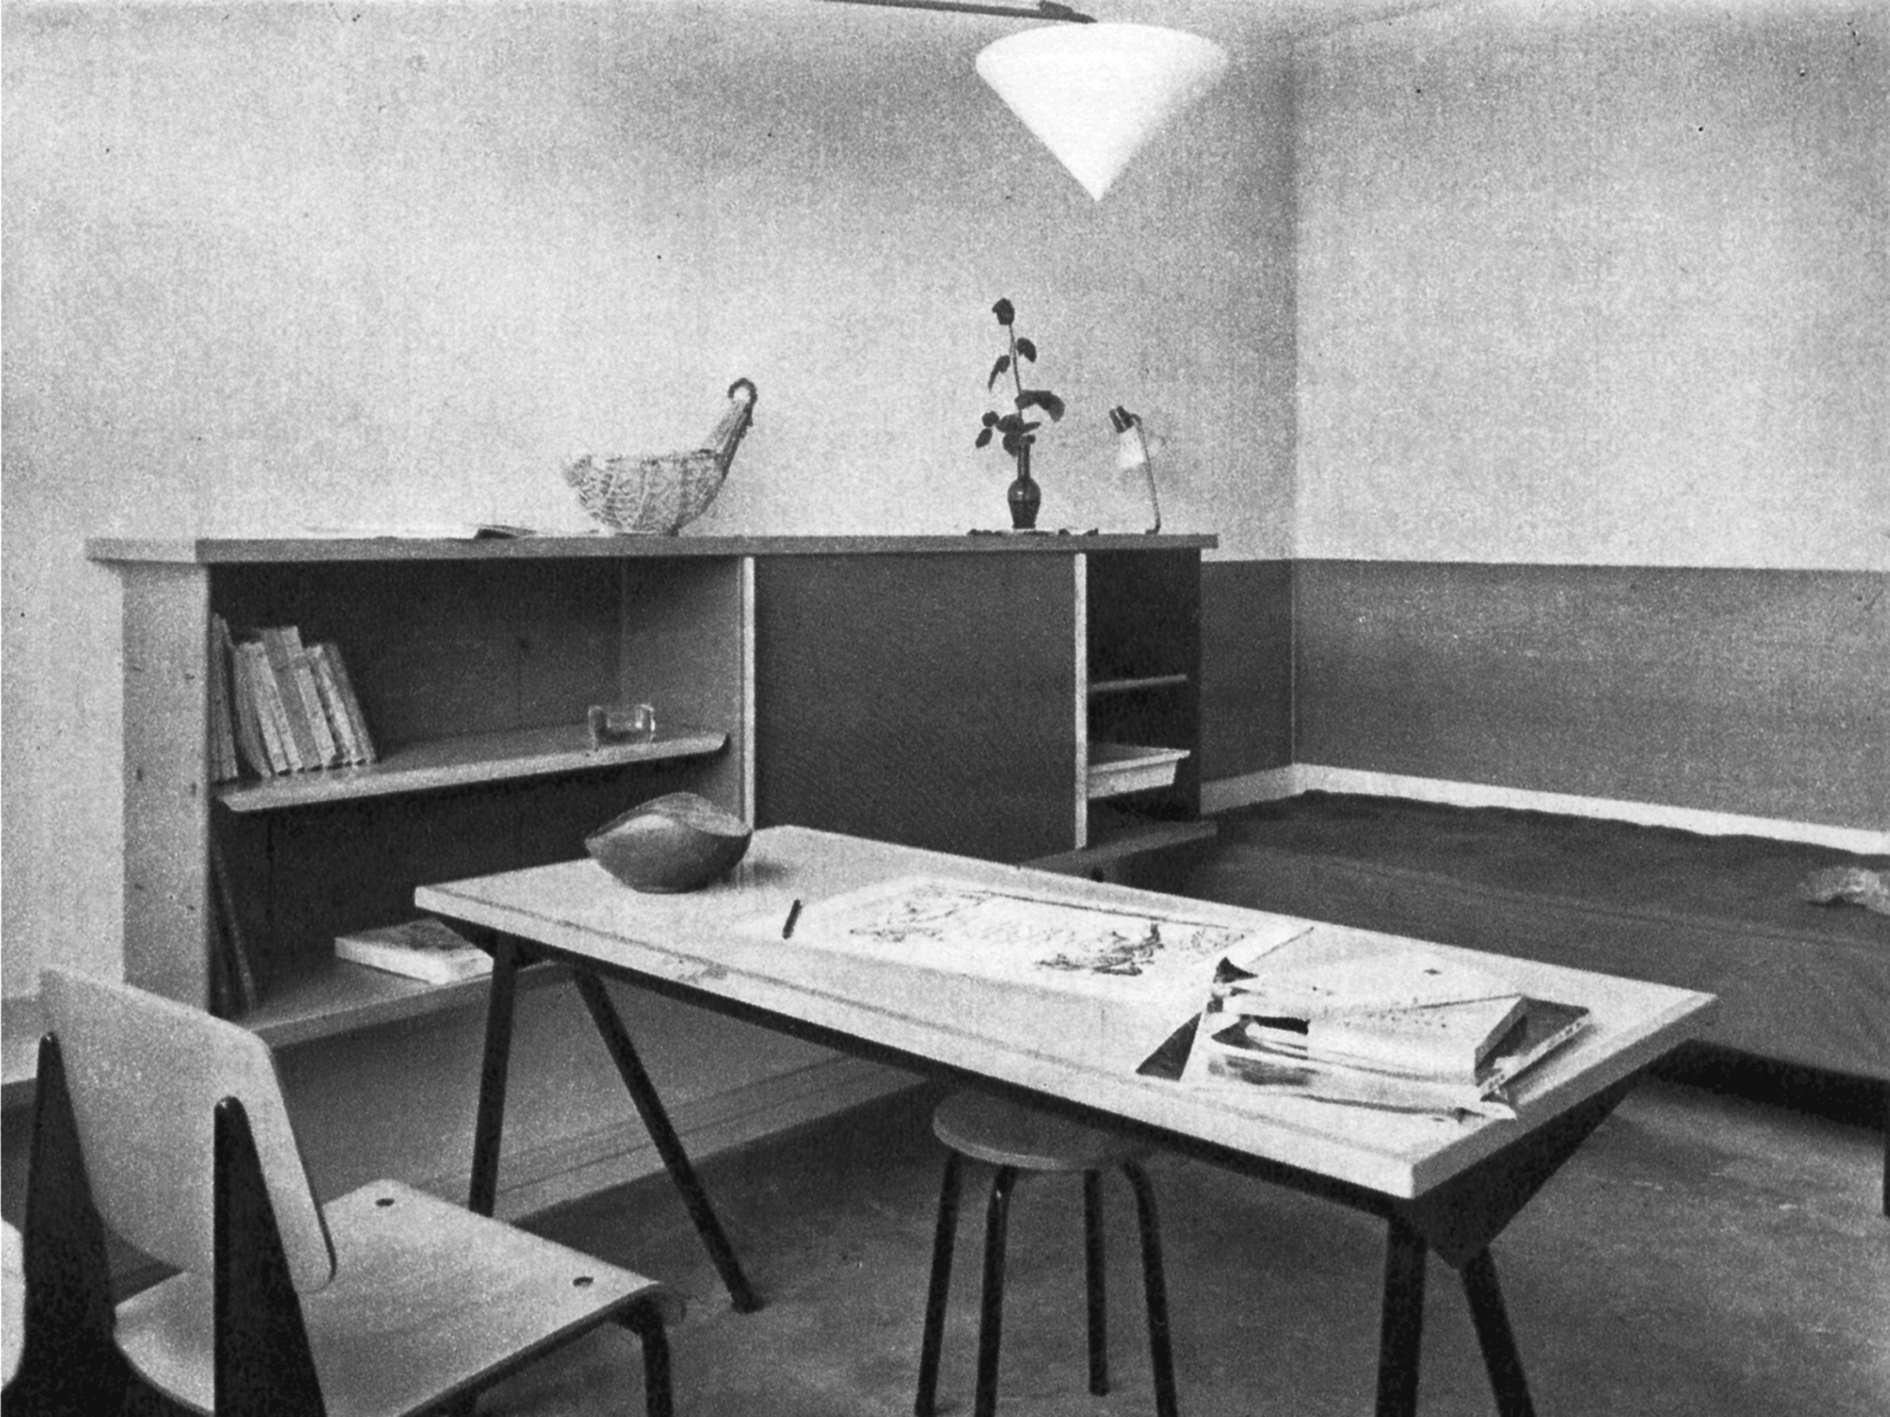 Cité Universitaire, Antony (architects E. Beaudouin and P. Fournier, 1951–1957). One of the 150 single rooms furnished by the Prouvé-Perriand-Villiger team, 1955: type Antony bookcase (adaptation of the Mexique bookcase by Charlotte Perriand), Compas desk with tube legs, Métropole no. 305 chair, fauteuil léger no. 356, SCAL no. 450 bed (with a swiveling tablet by Charlotte Perriand).